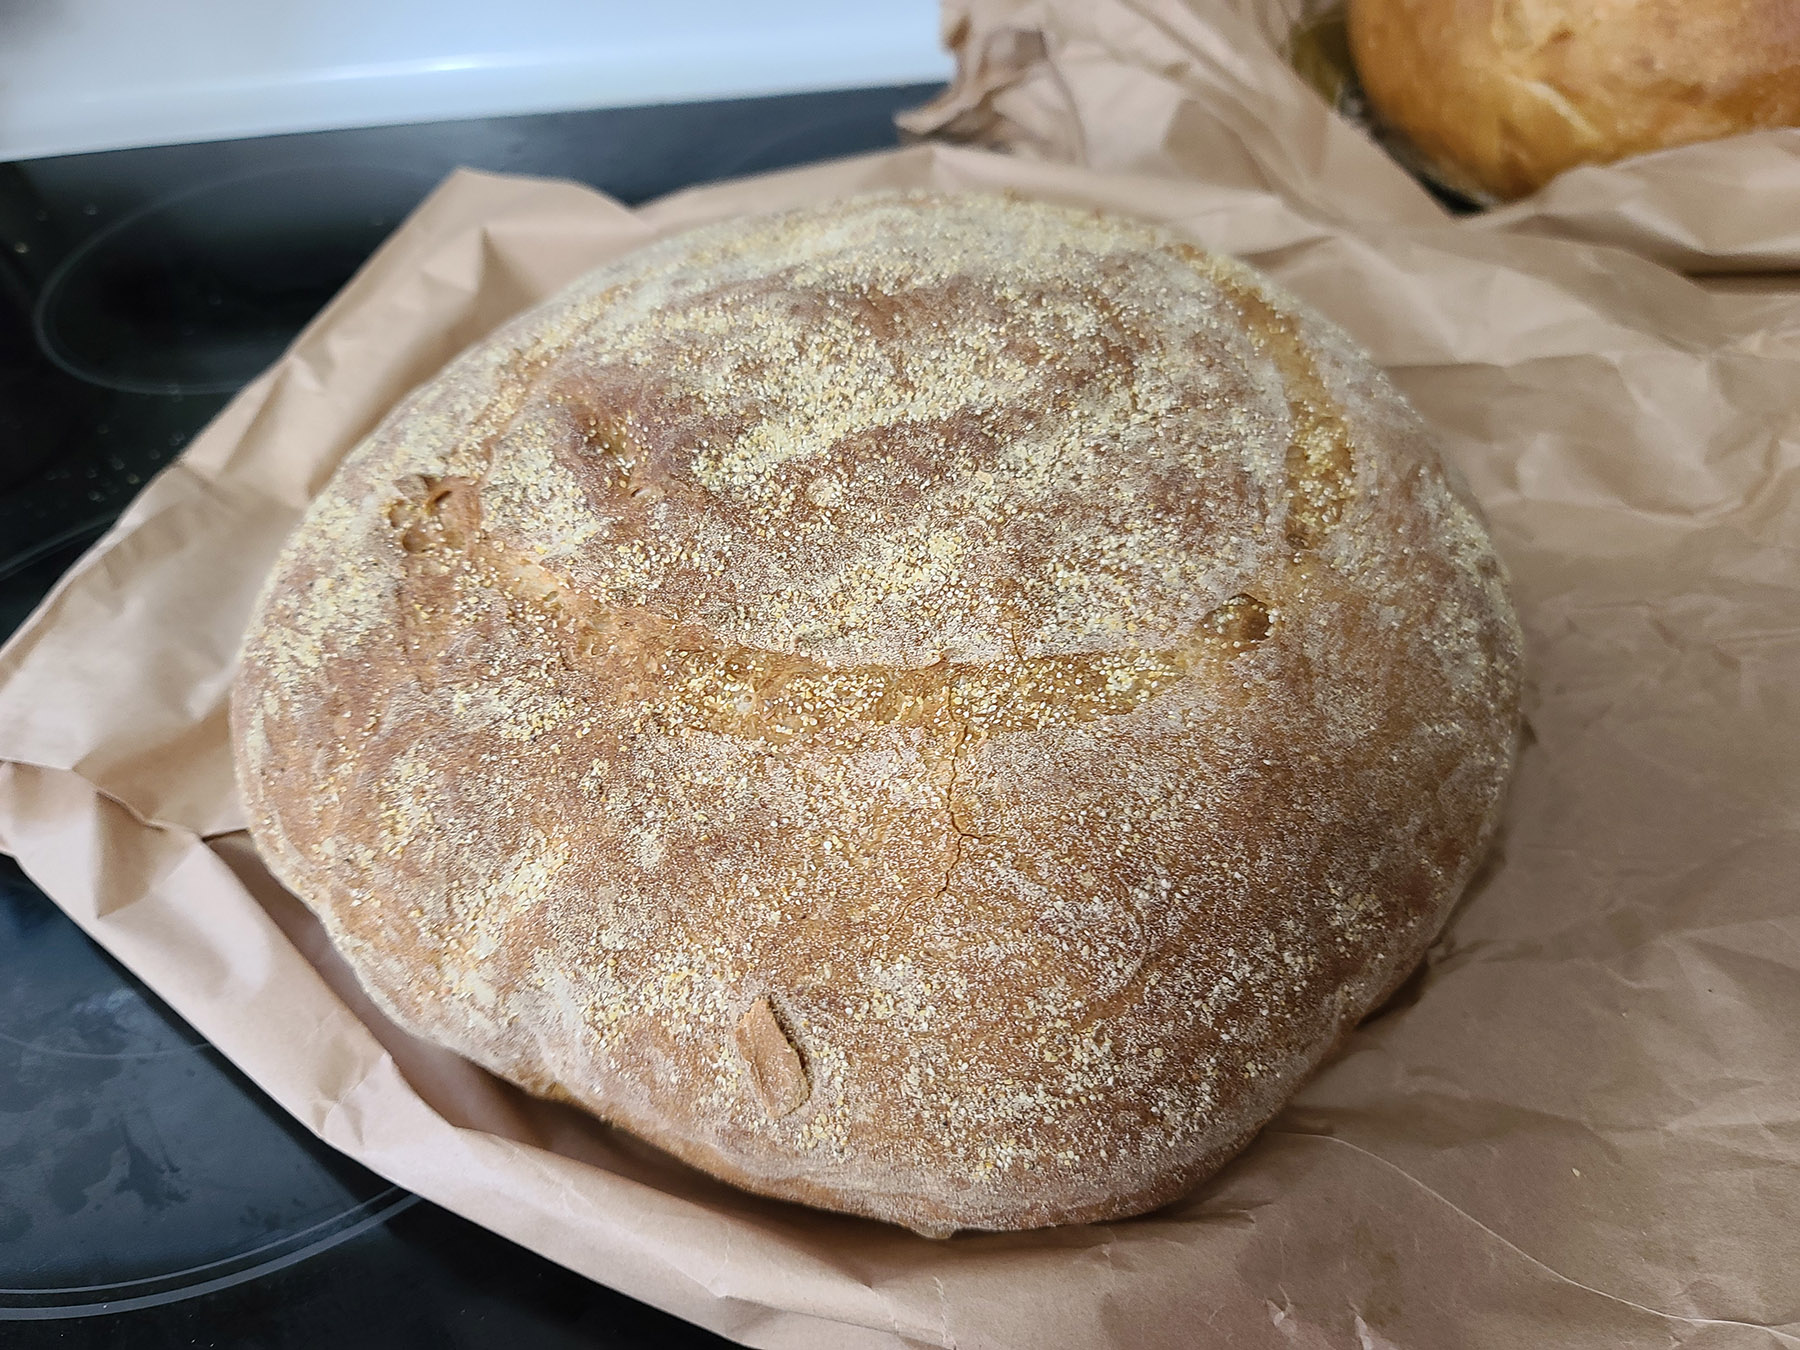 A loaf of calabrese bread, to be made into a muffuletta sandwich.